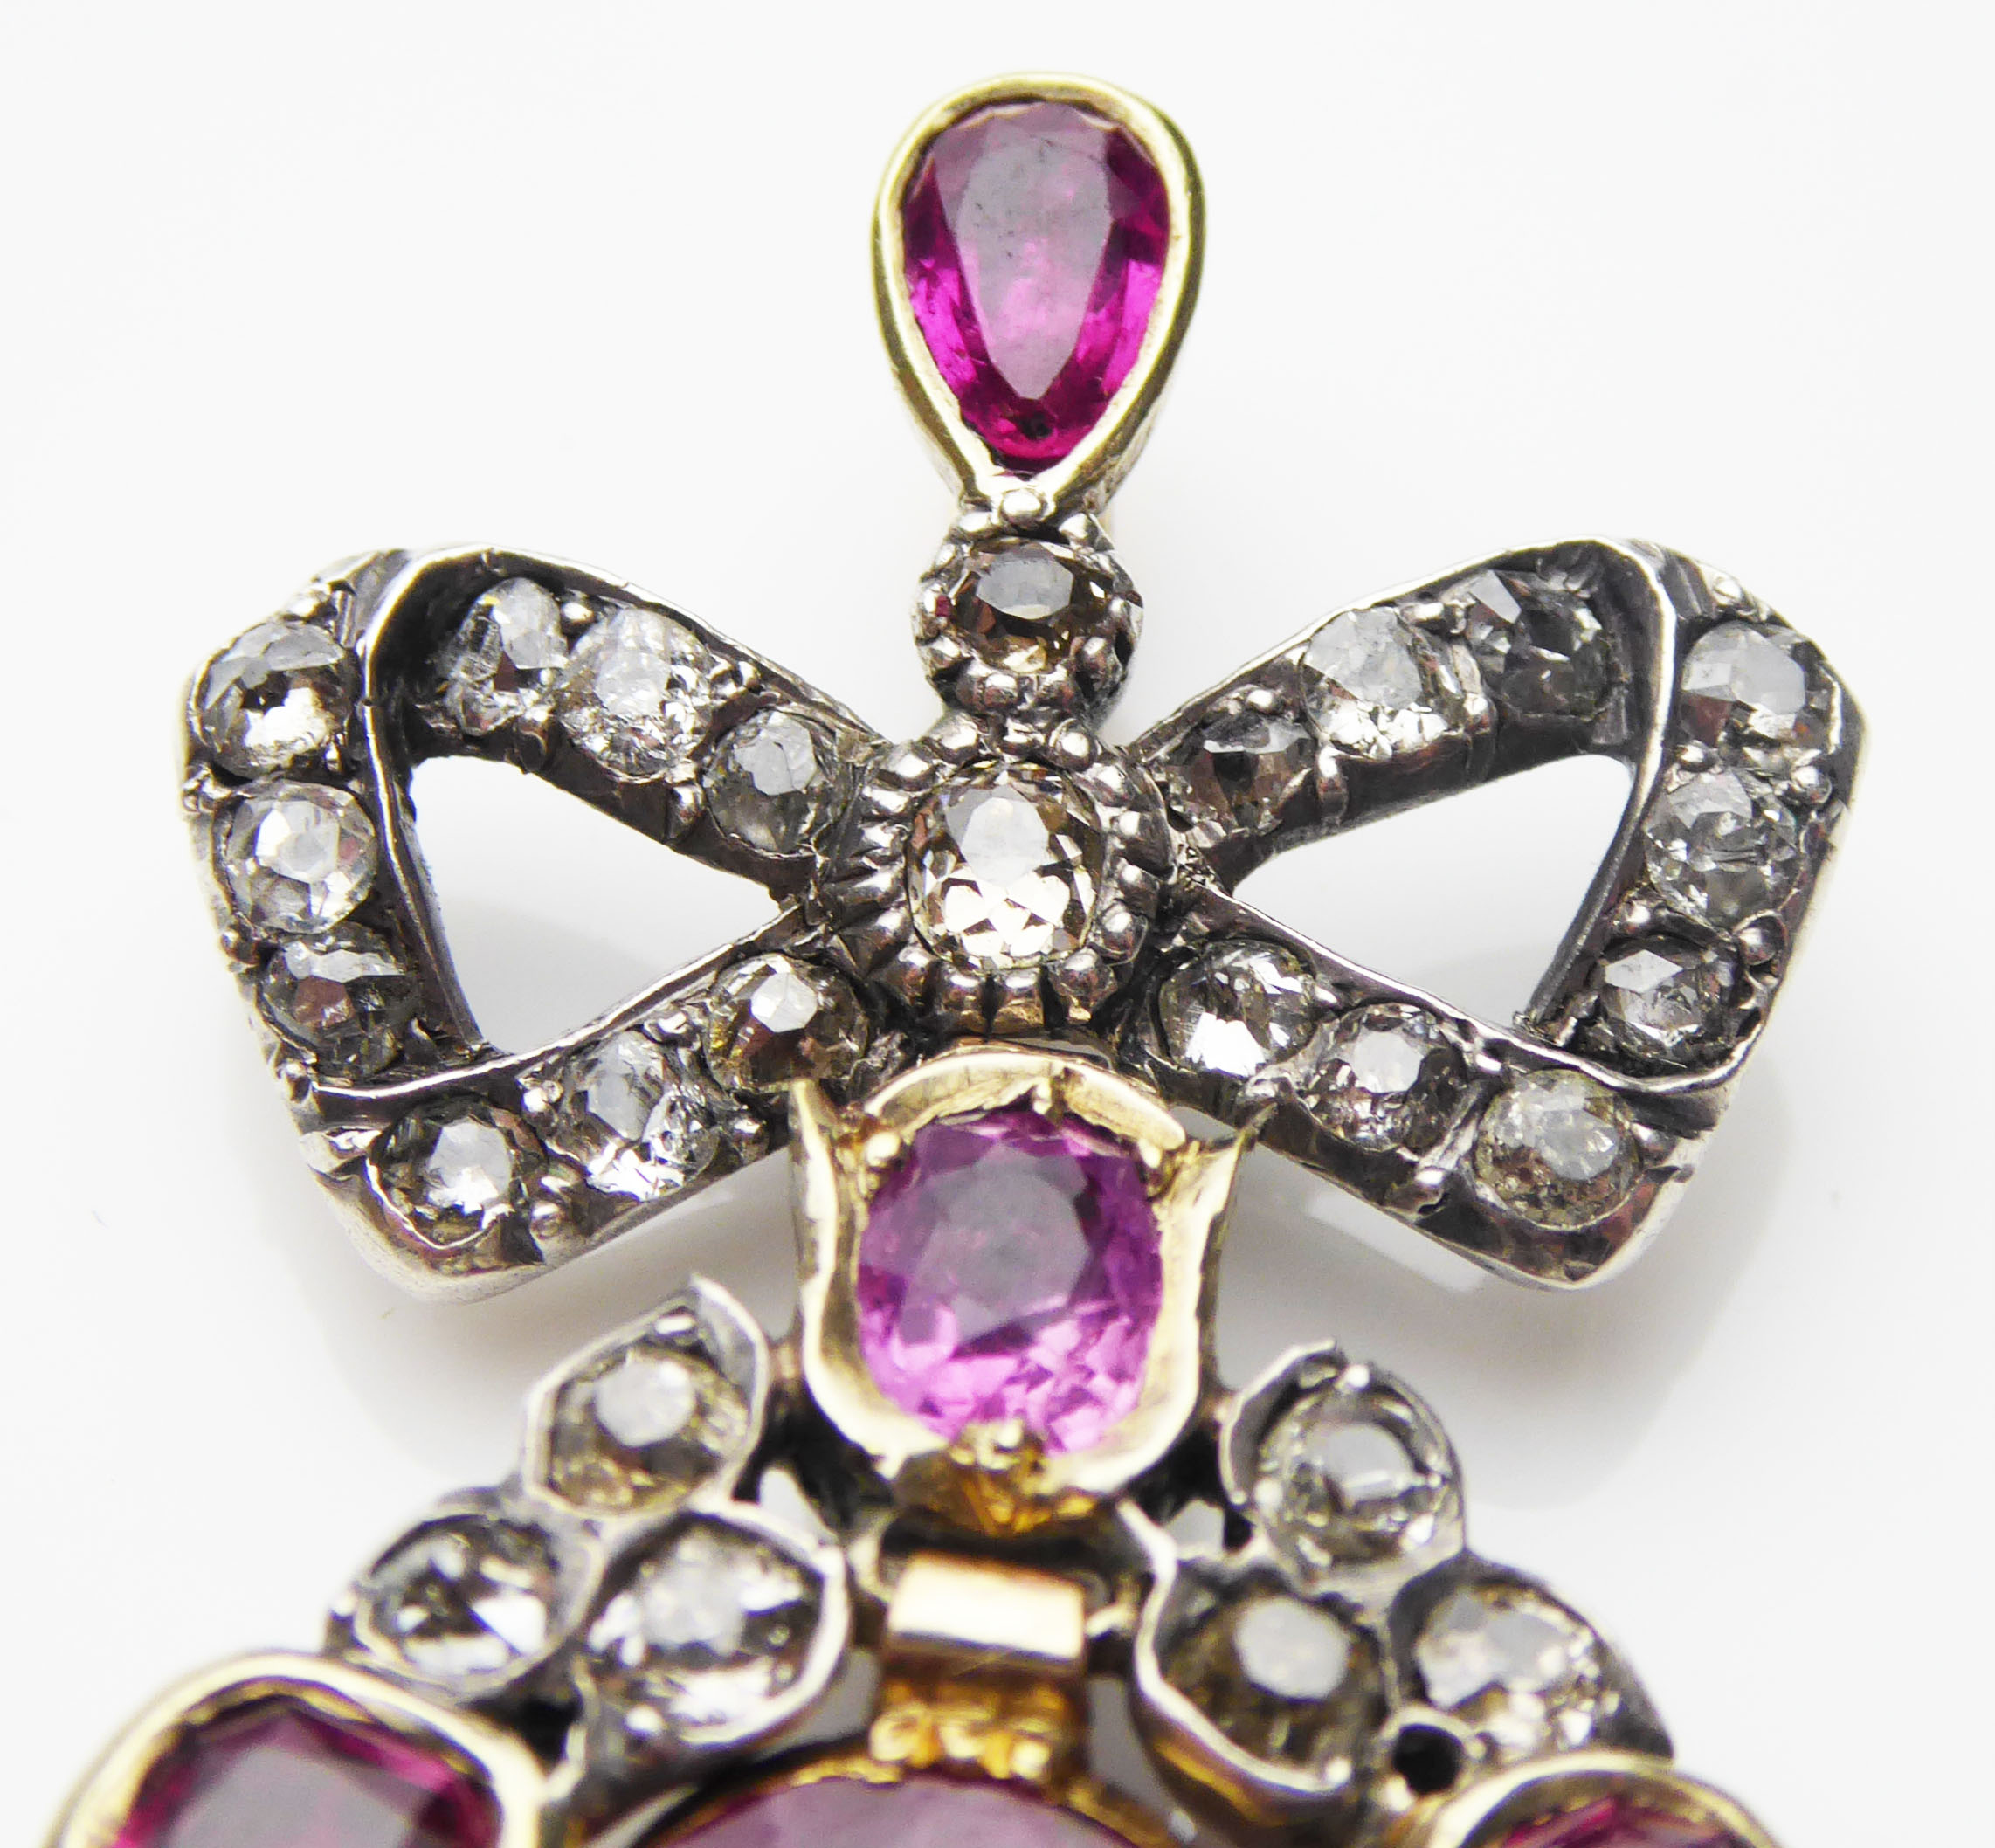 AN IMPRESSIVE 19TH CENTURY BURMESE RUBY, SAPPHIRE AND DIAMOND PENDANT, CIRCA 1820 The articulated - Image 4 of 10